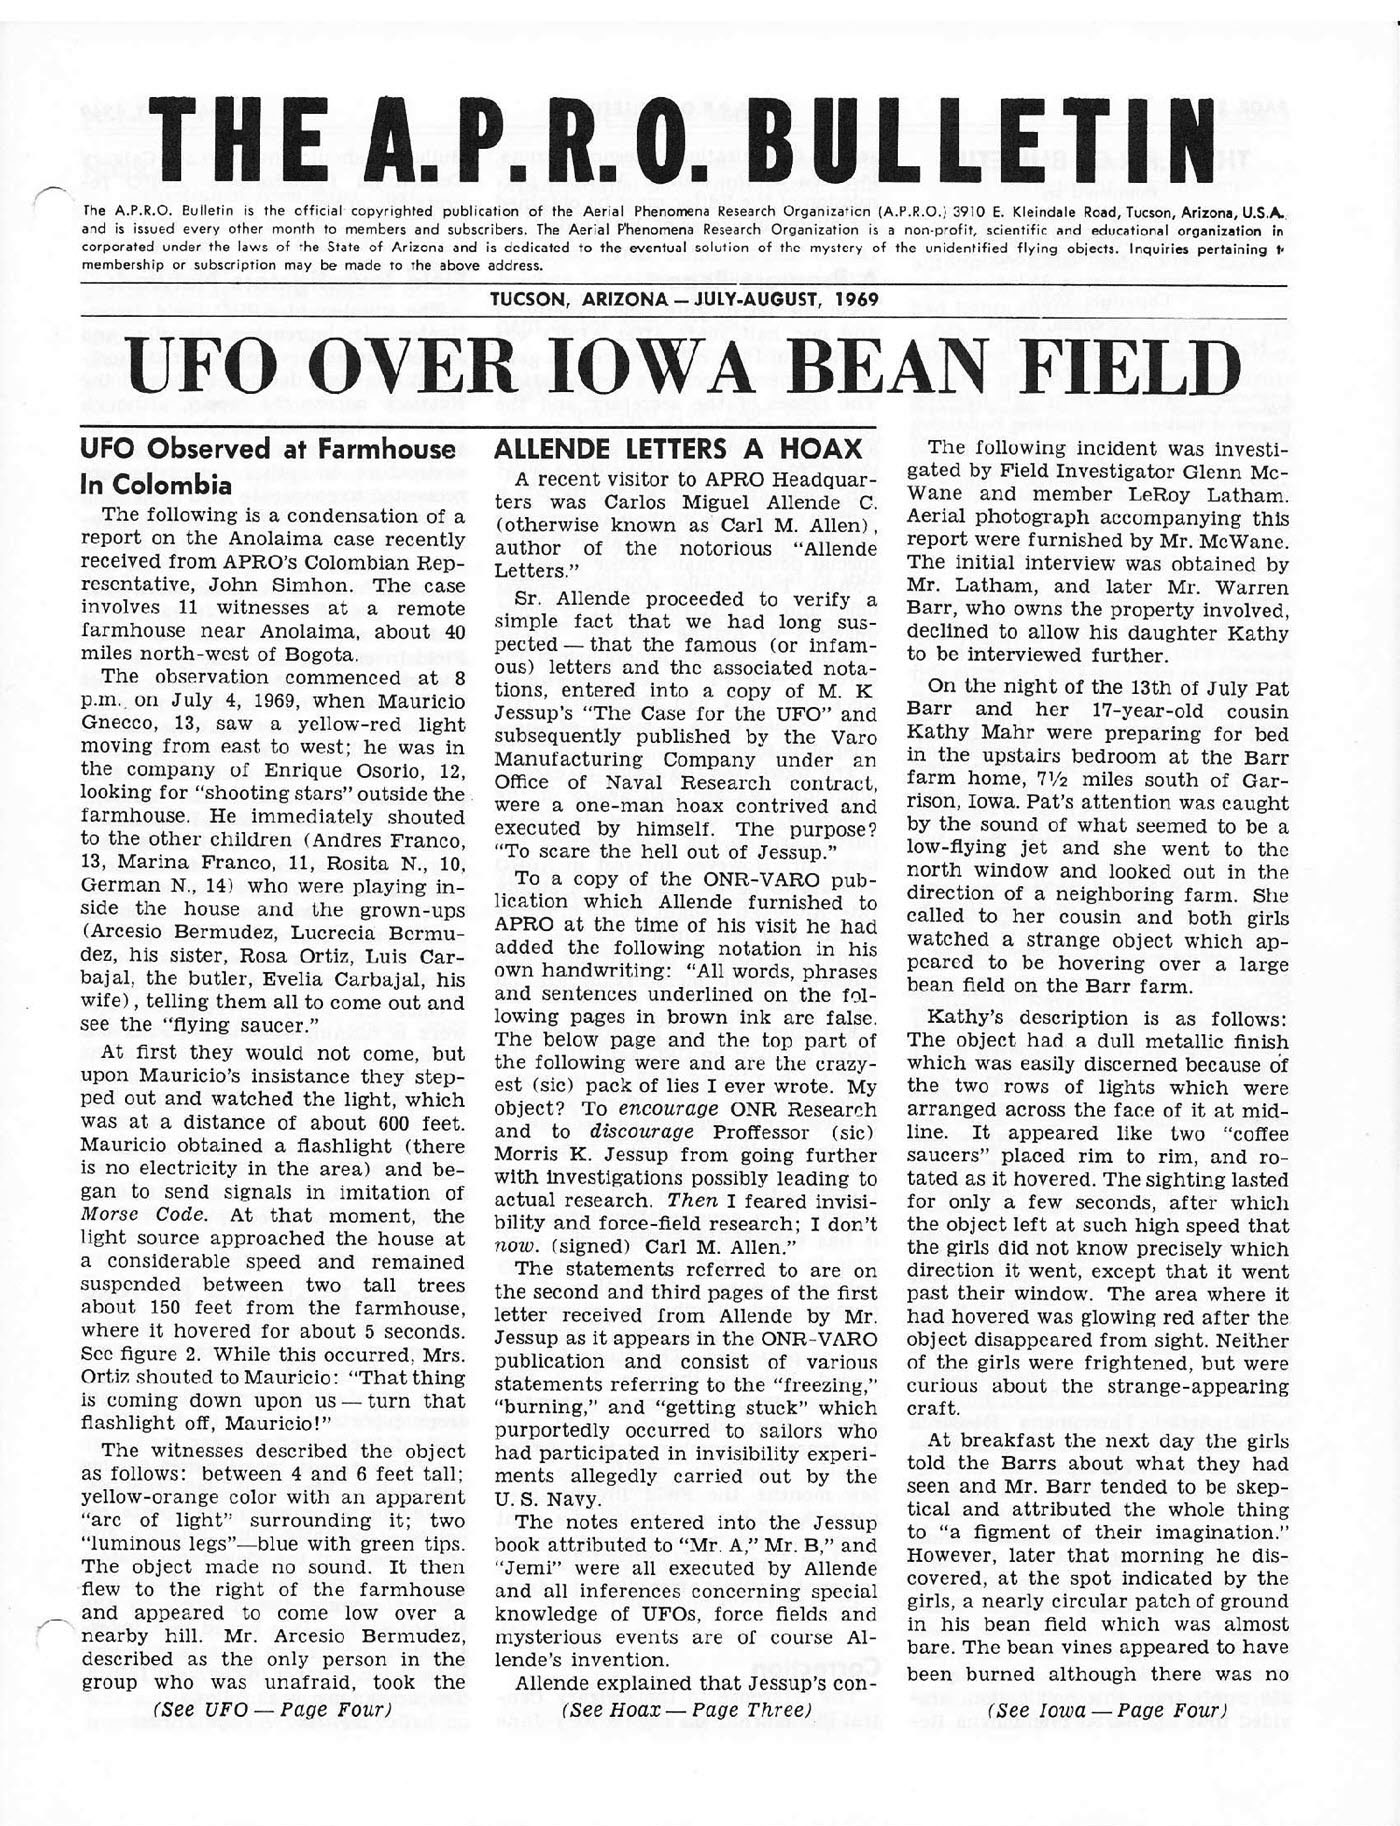 A.P.R.O. Bulletin - July-August, 1969-Page 1